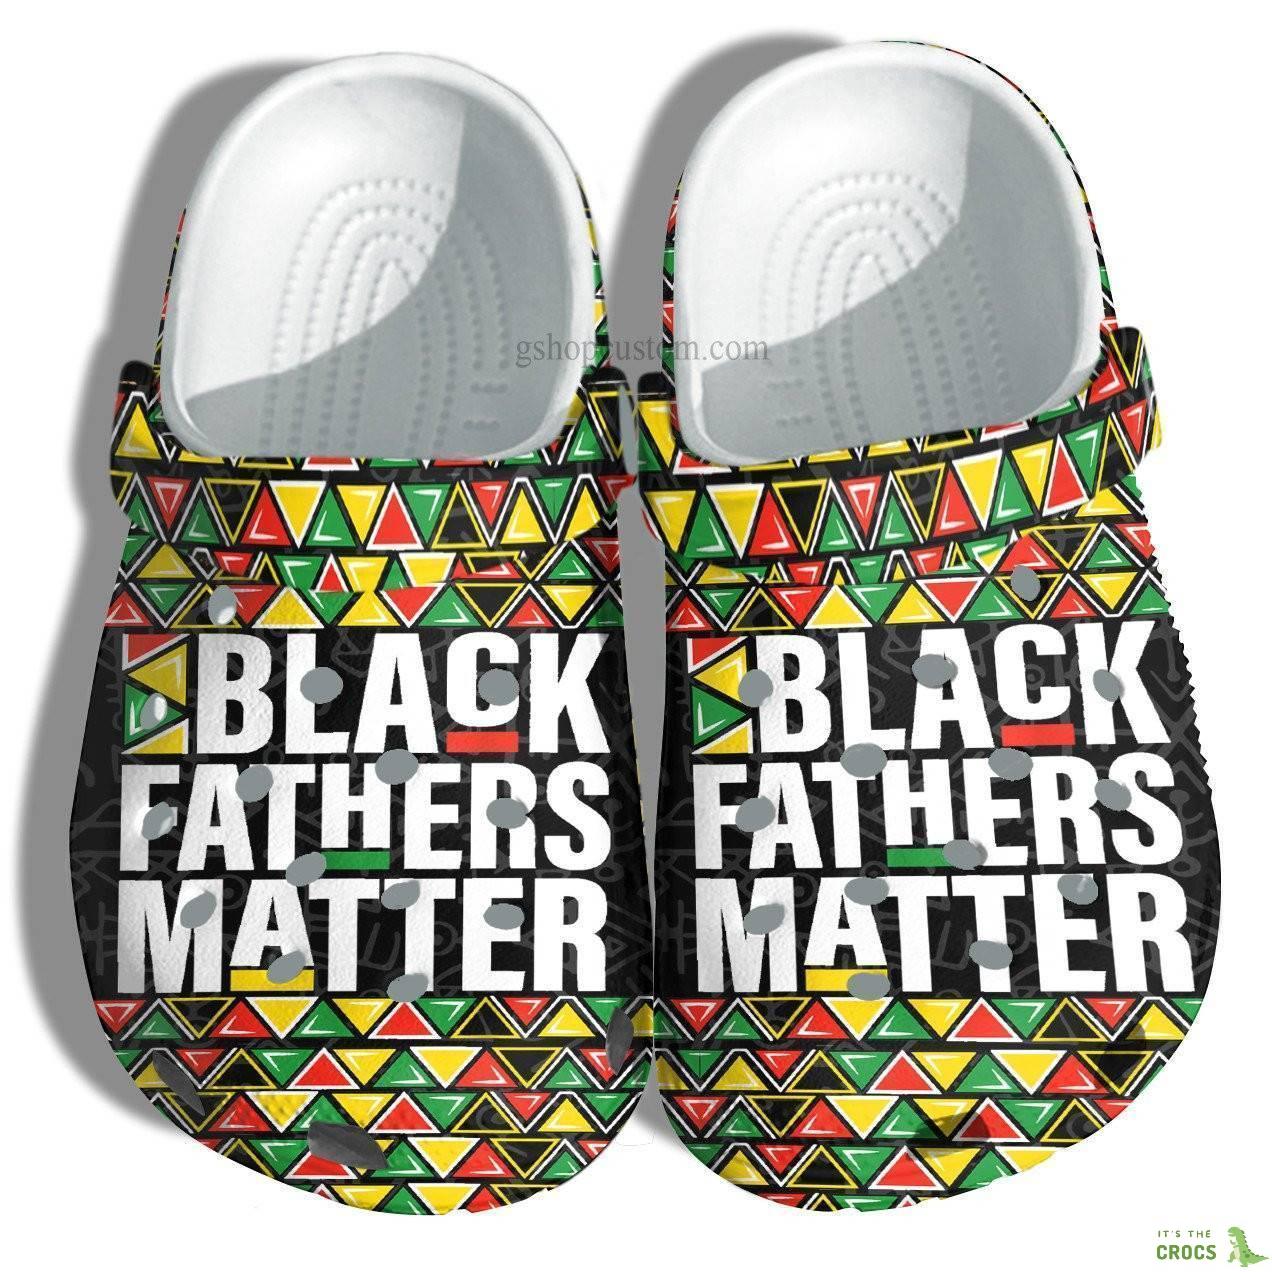 Black Fathers Matter Africa Style Croc Crocs Clog Shoes Gift Grandpa Father Day – Black King Father Vintage Crocs Clog Shoes Customize